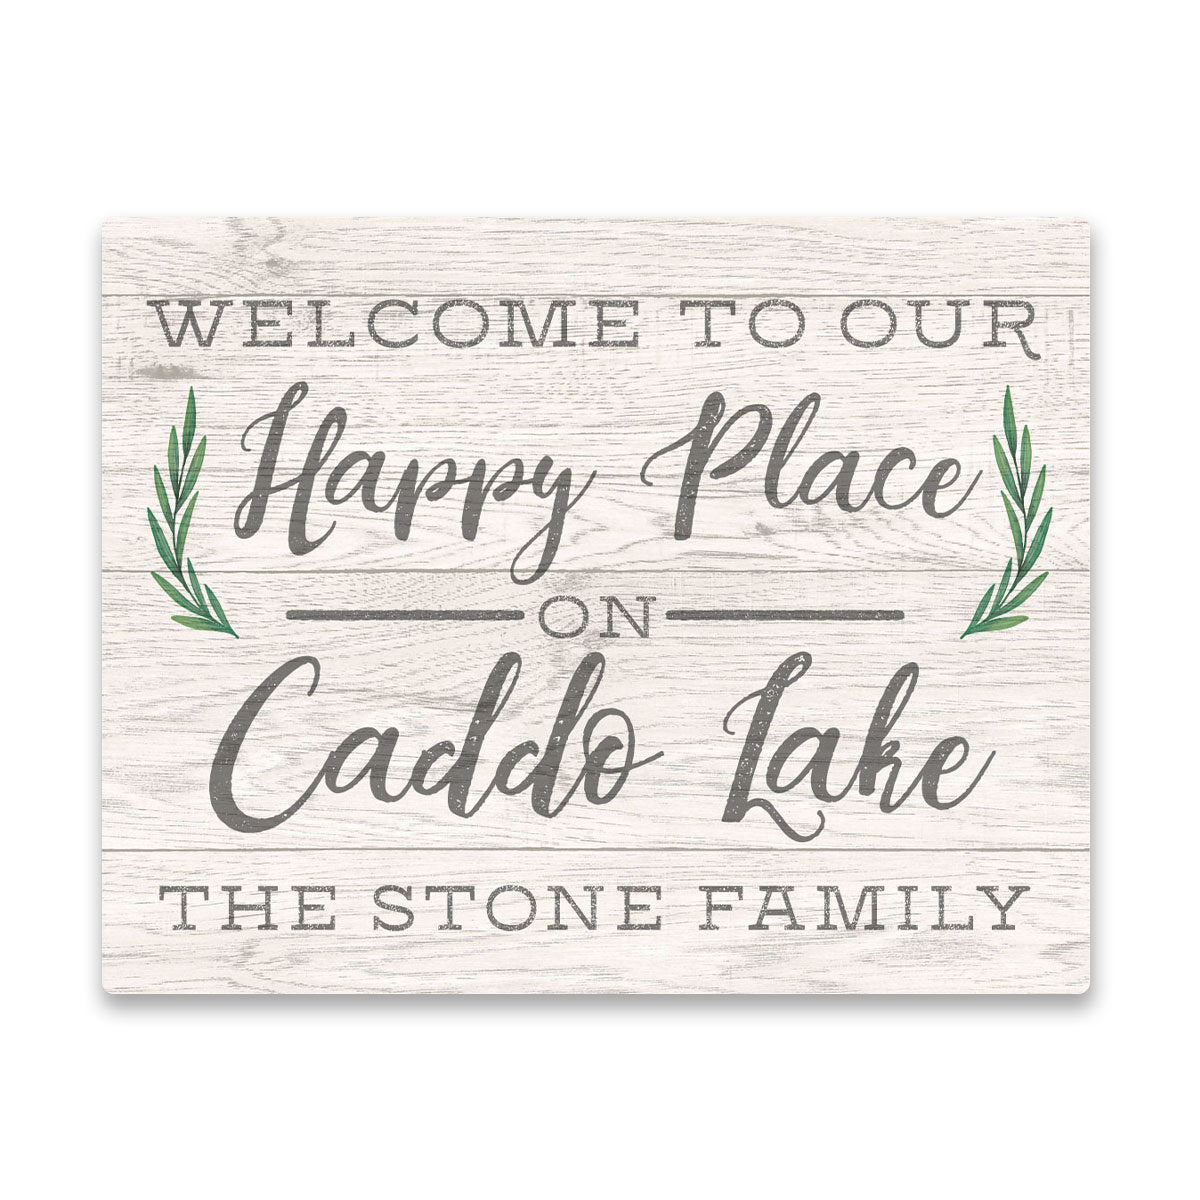 Personalized Welcome to Our Happy Place on Caddo lake Wall Art